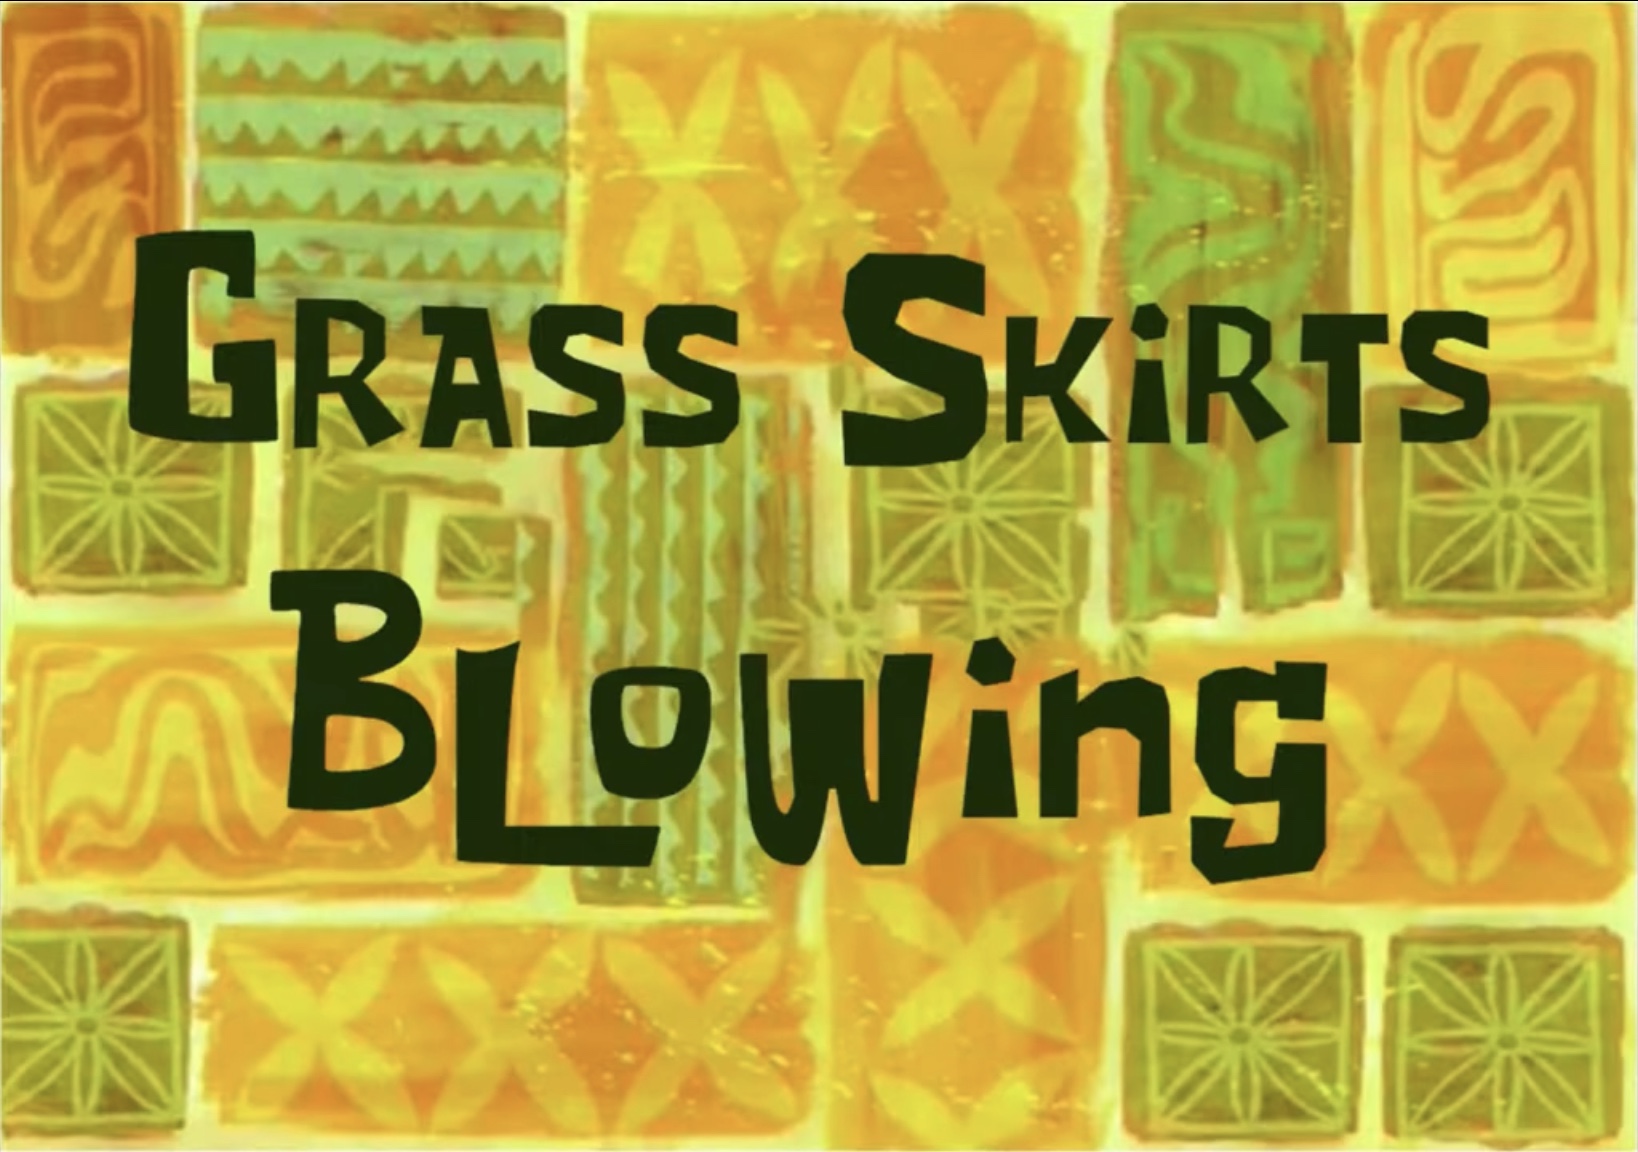 High Quality Grass Skirts Blowing title card Blank Meme Template